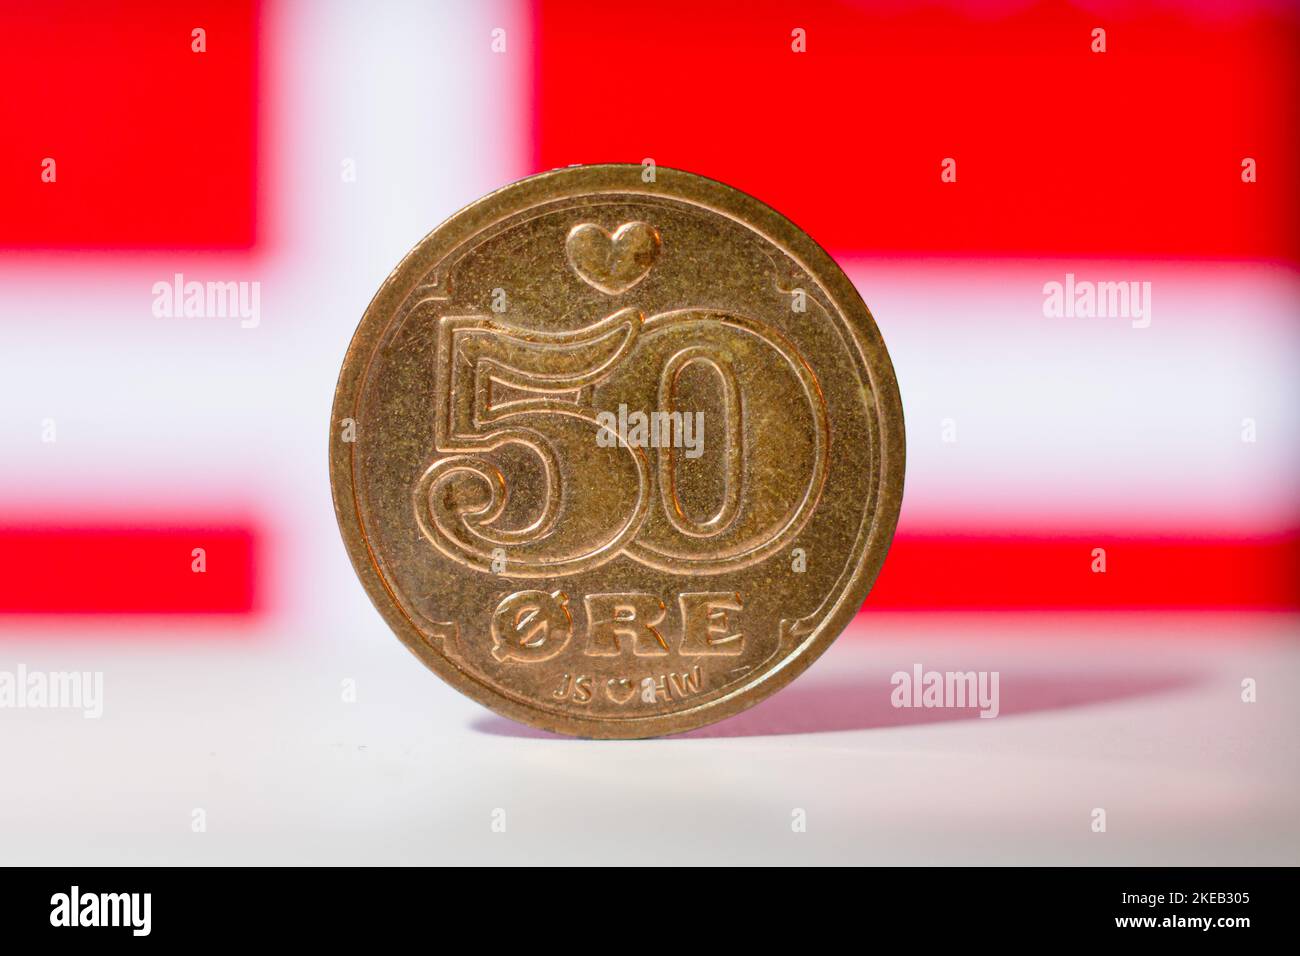 Danish 50 ore with a Danish flag behind in a background - macro shallow focus Stock Photo